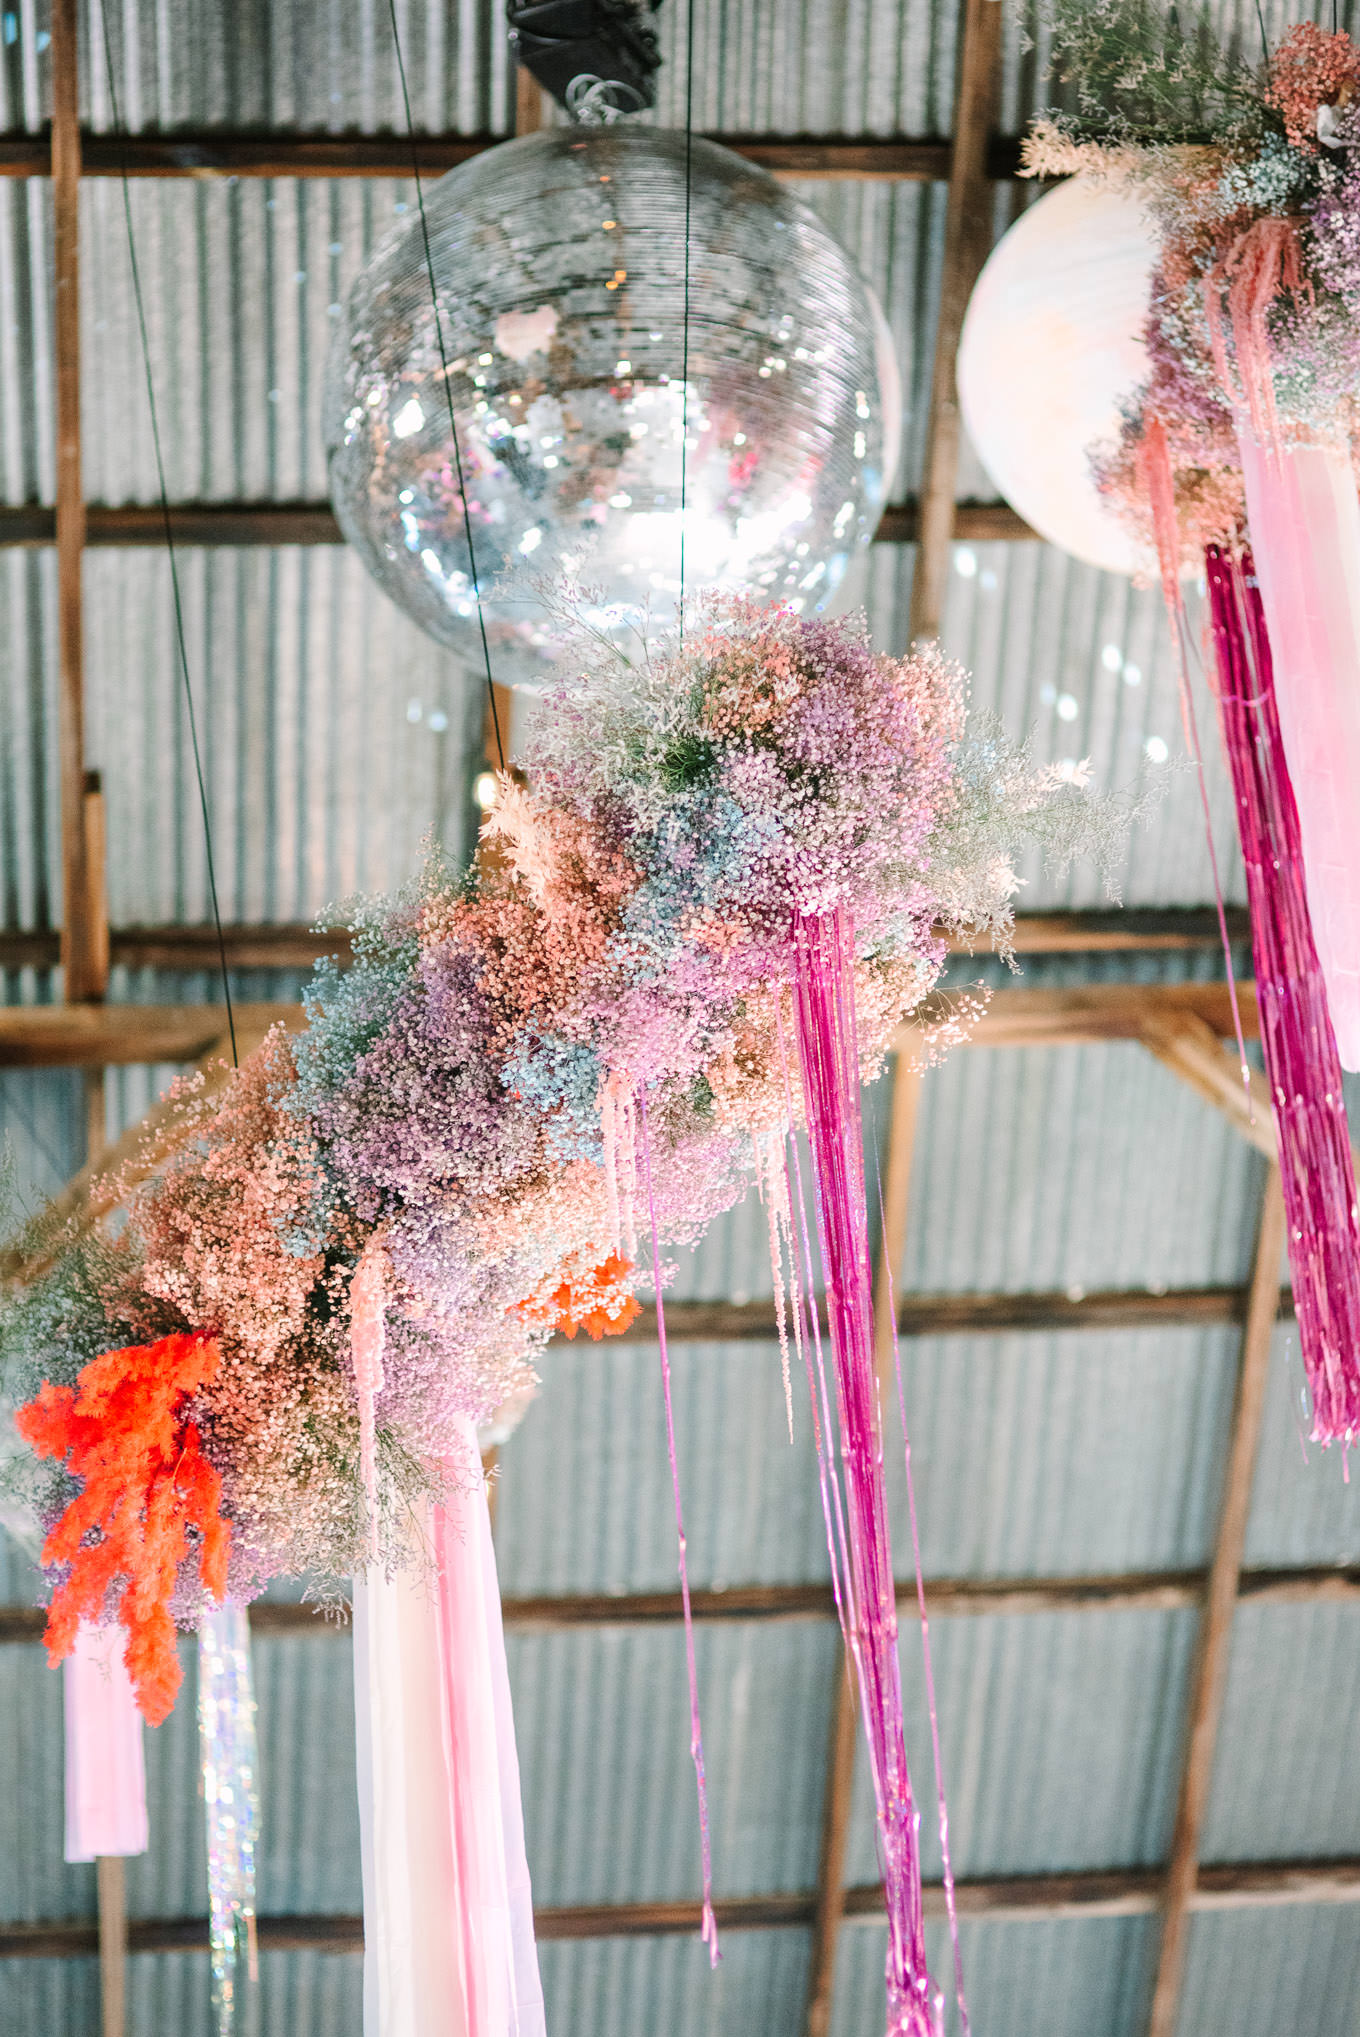 Whimsical disco ball and baby's breath wedding reception installation | Colorful and quirky wedding at Higuera Ranch in San Luis Obispo | #sanluisobispowedding #californiawedding #higueraranch #madonnainn   Source: Mary Costa Photography | Los Angeles